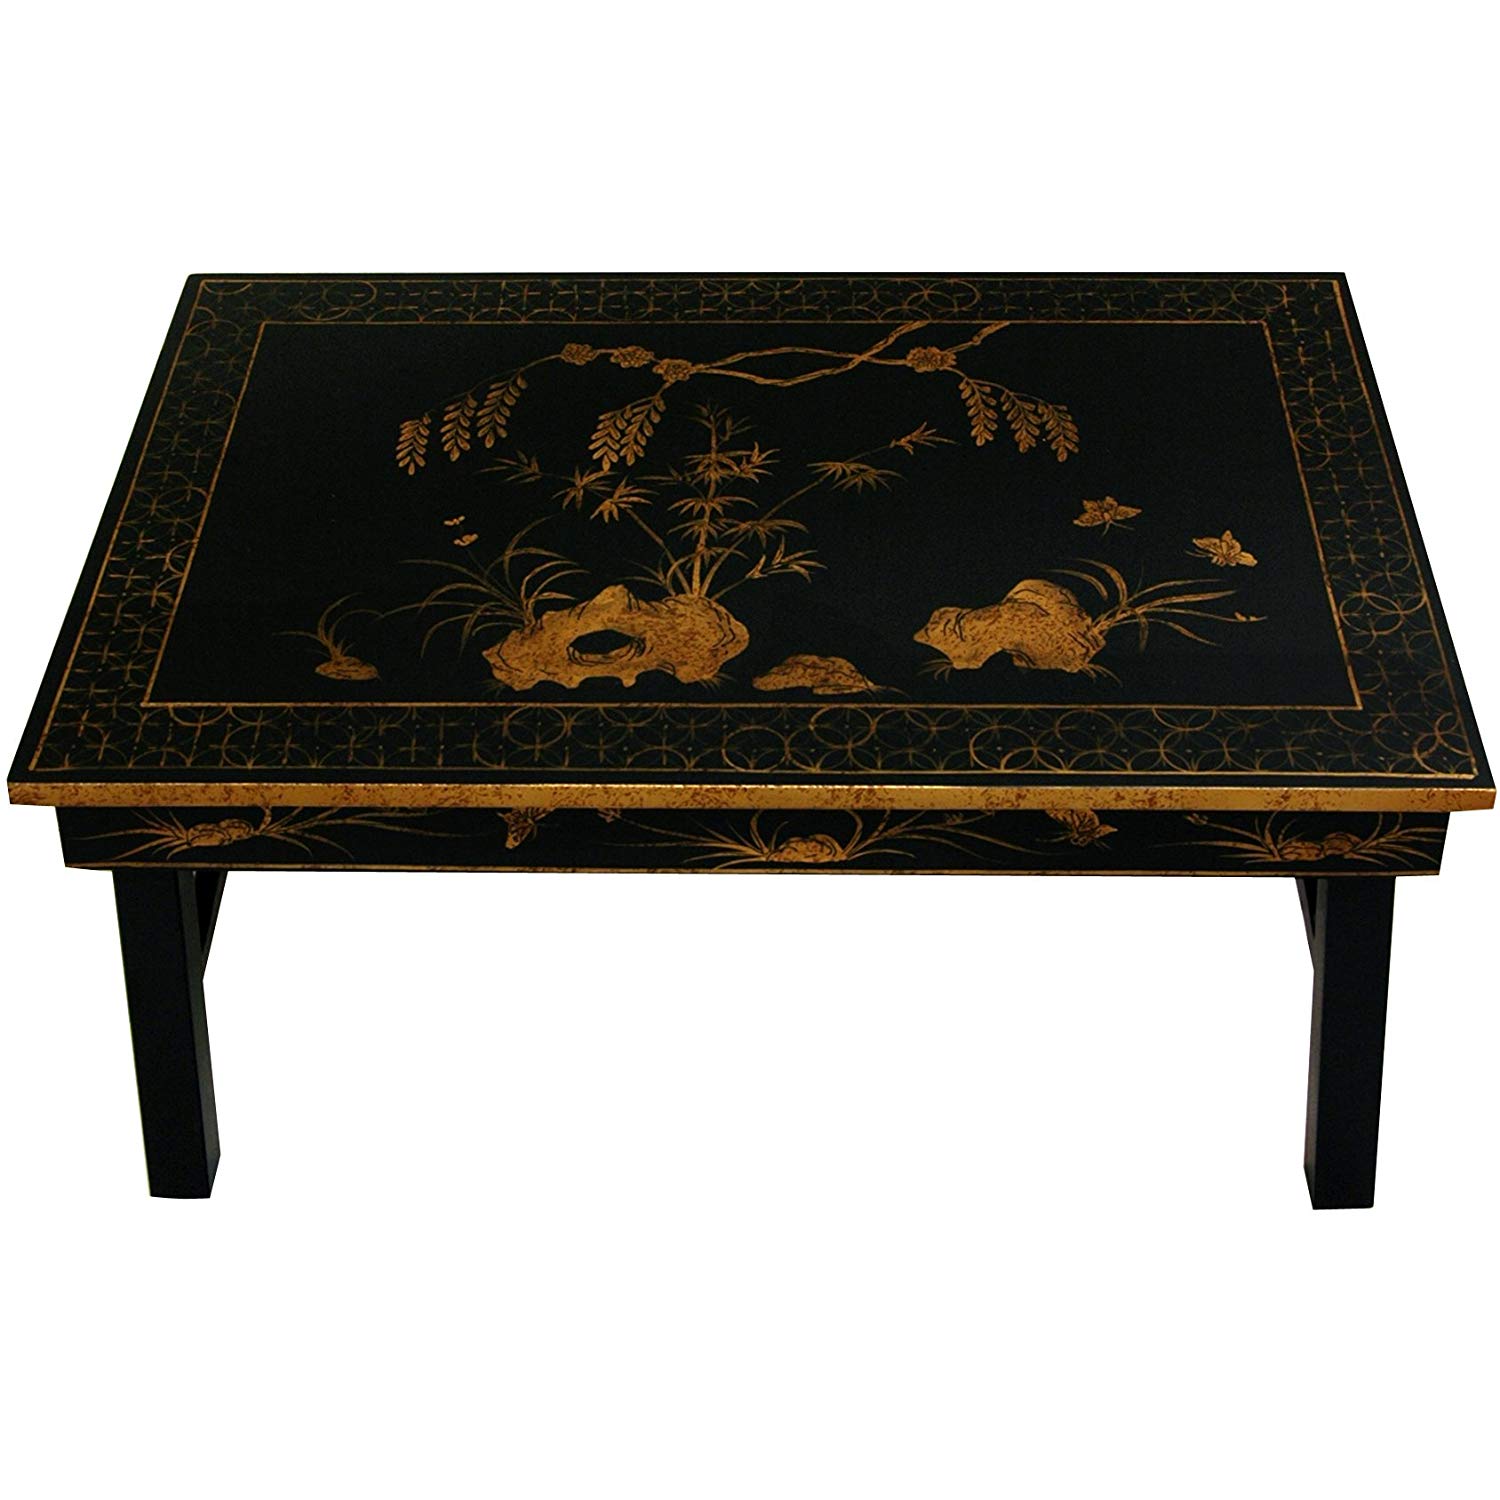 oriental furniture tea table with foldable legs home black lacquer accent kitchen beach themed grohe rainshower coffee ideas kidney bean retro modern wooden designs vintage sofa